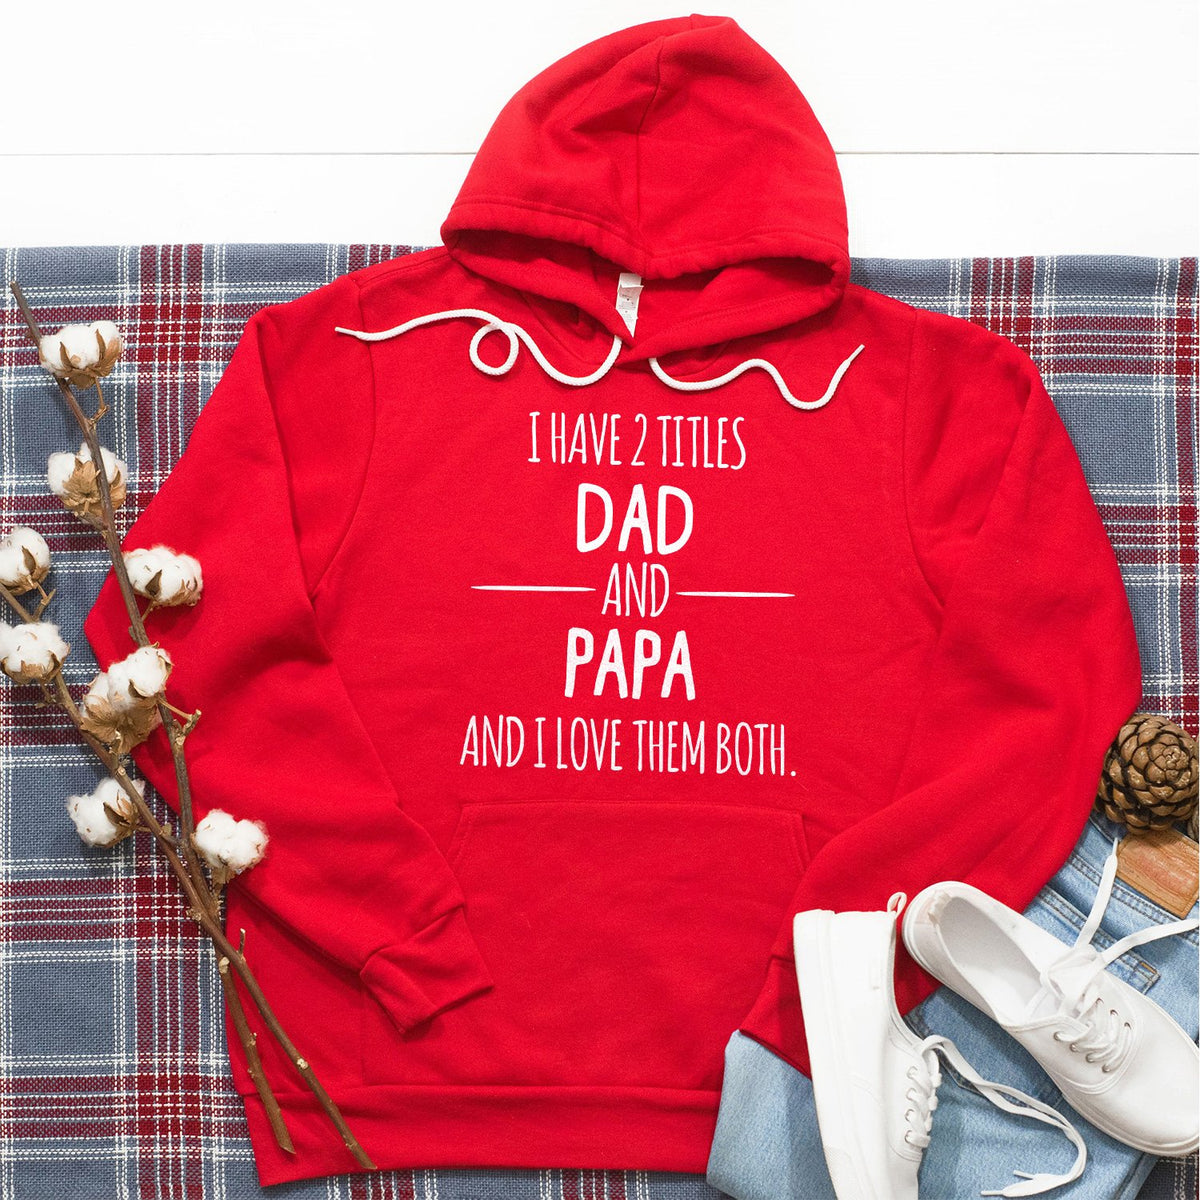 I Have 2 Titles Dad and Papa and I Love Them Both - Hoodie Sweatshirt